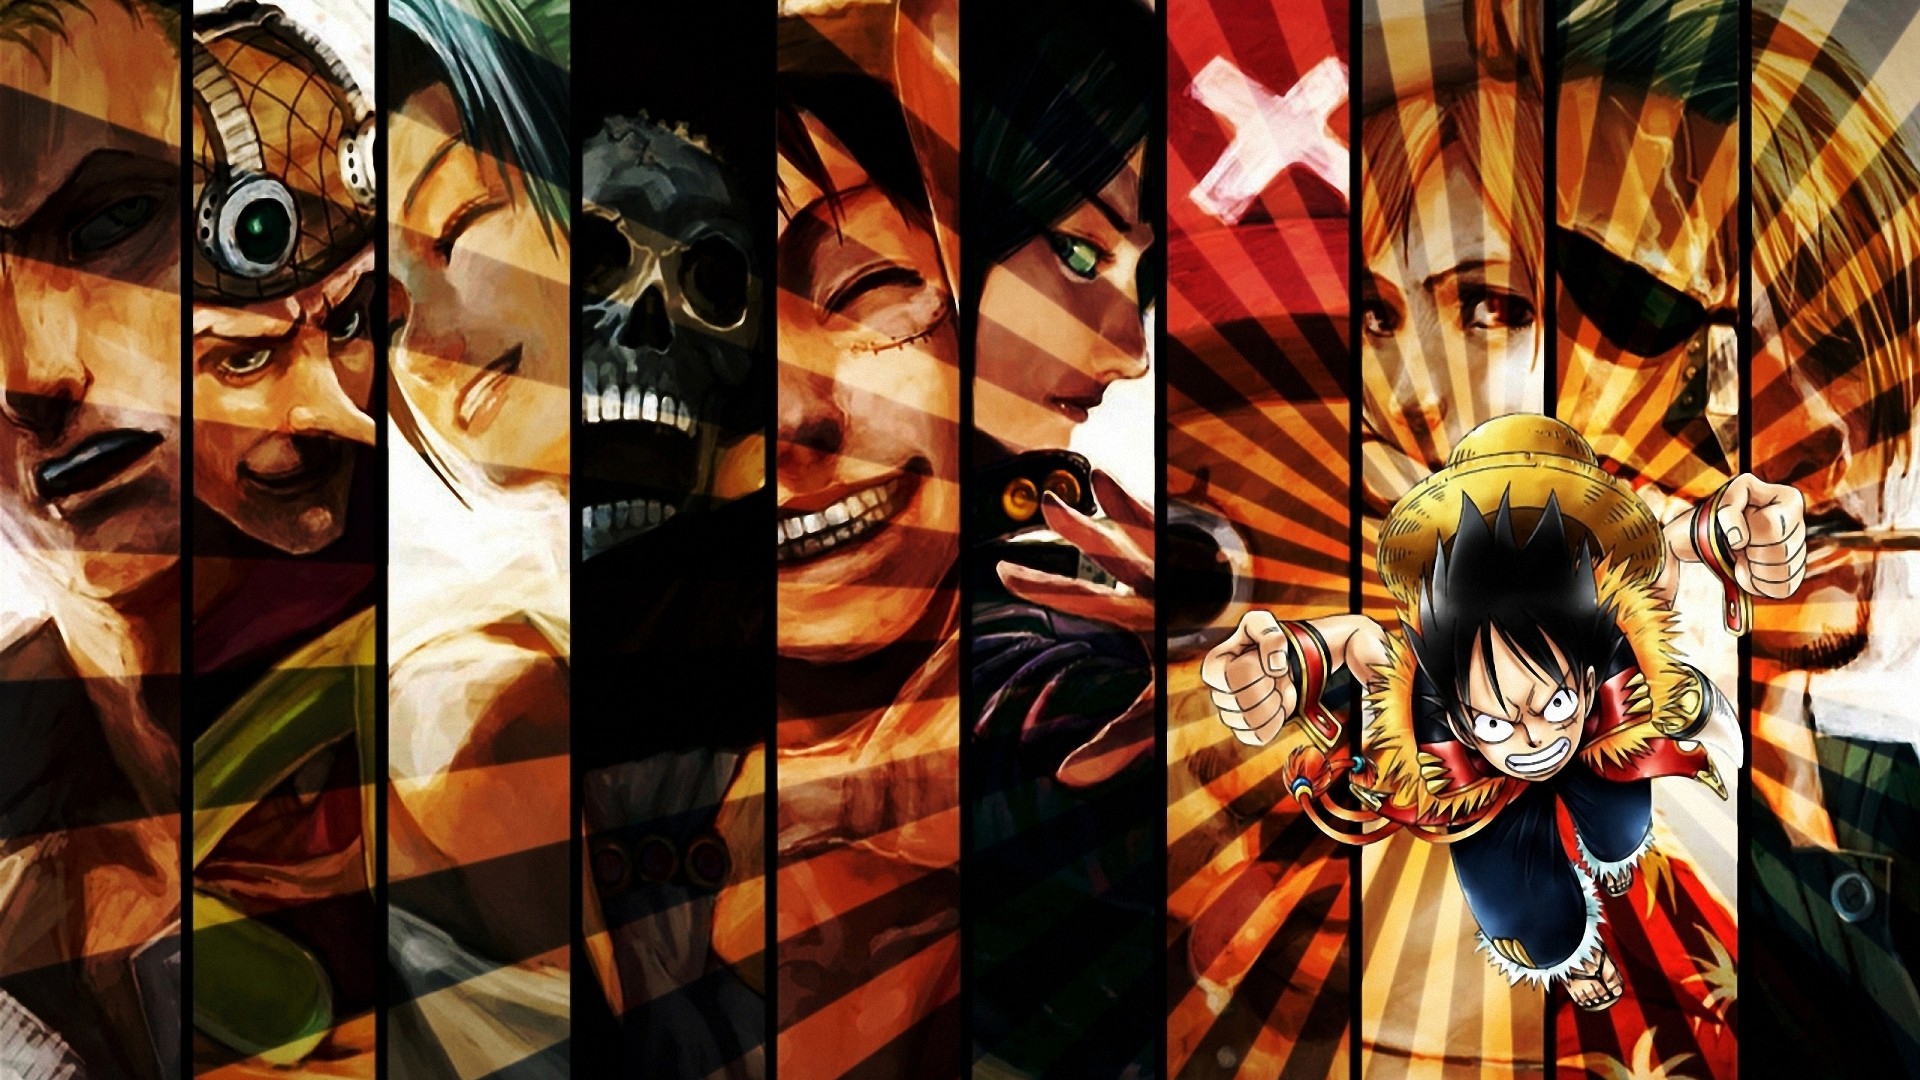 wallpaper hd anime one piece,art,graphic design,collage,anime,illustration